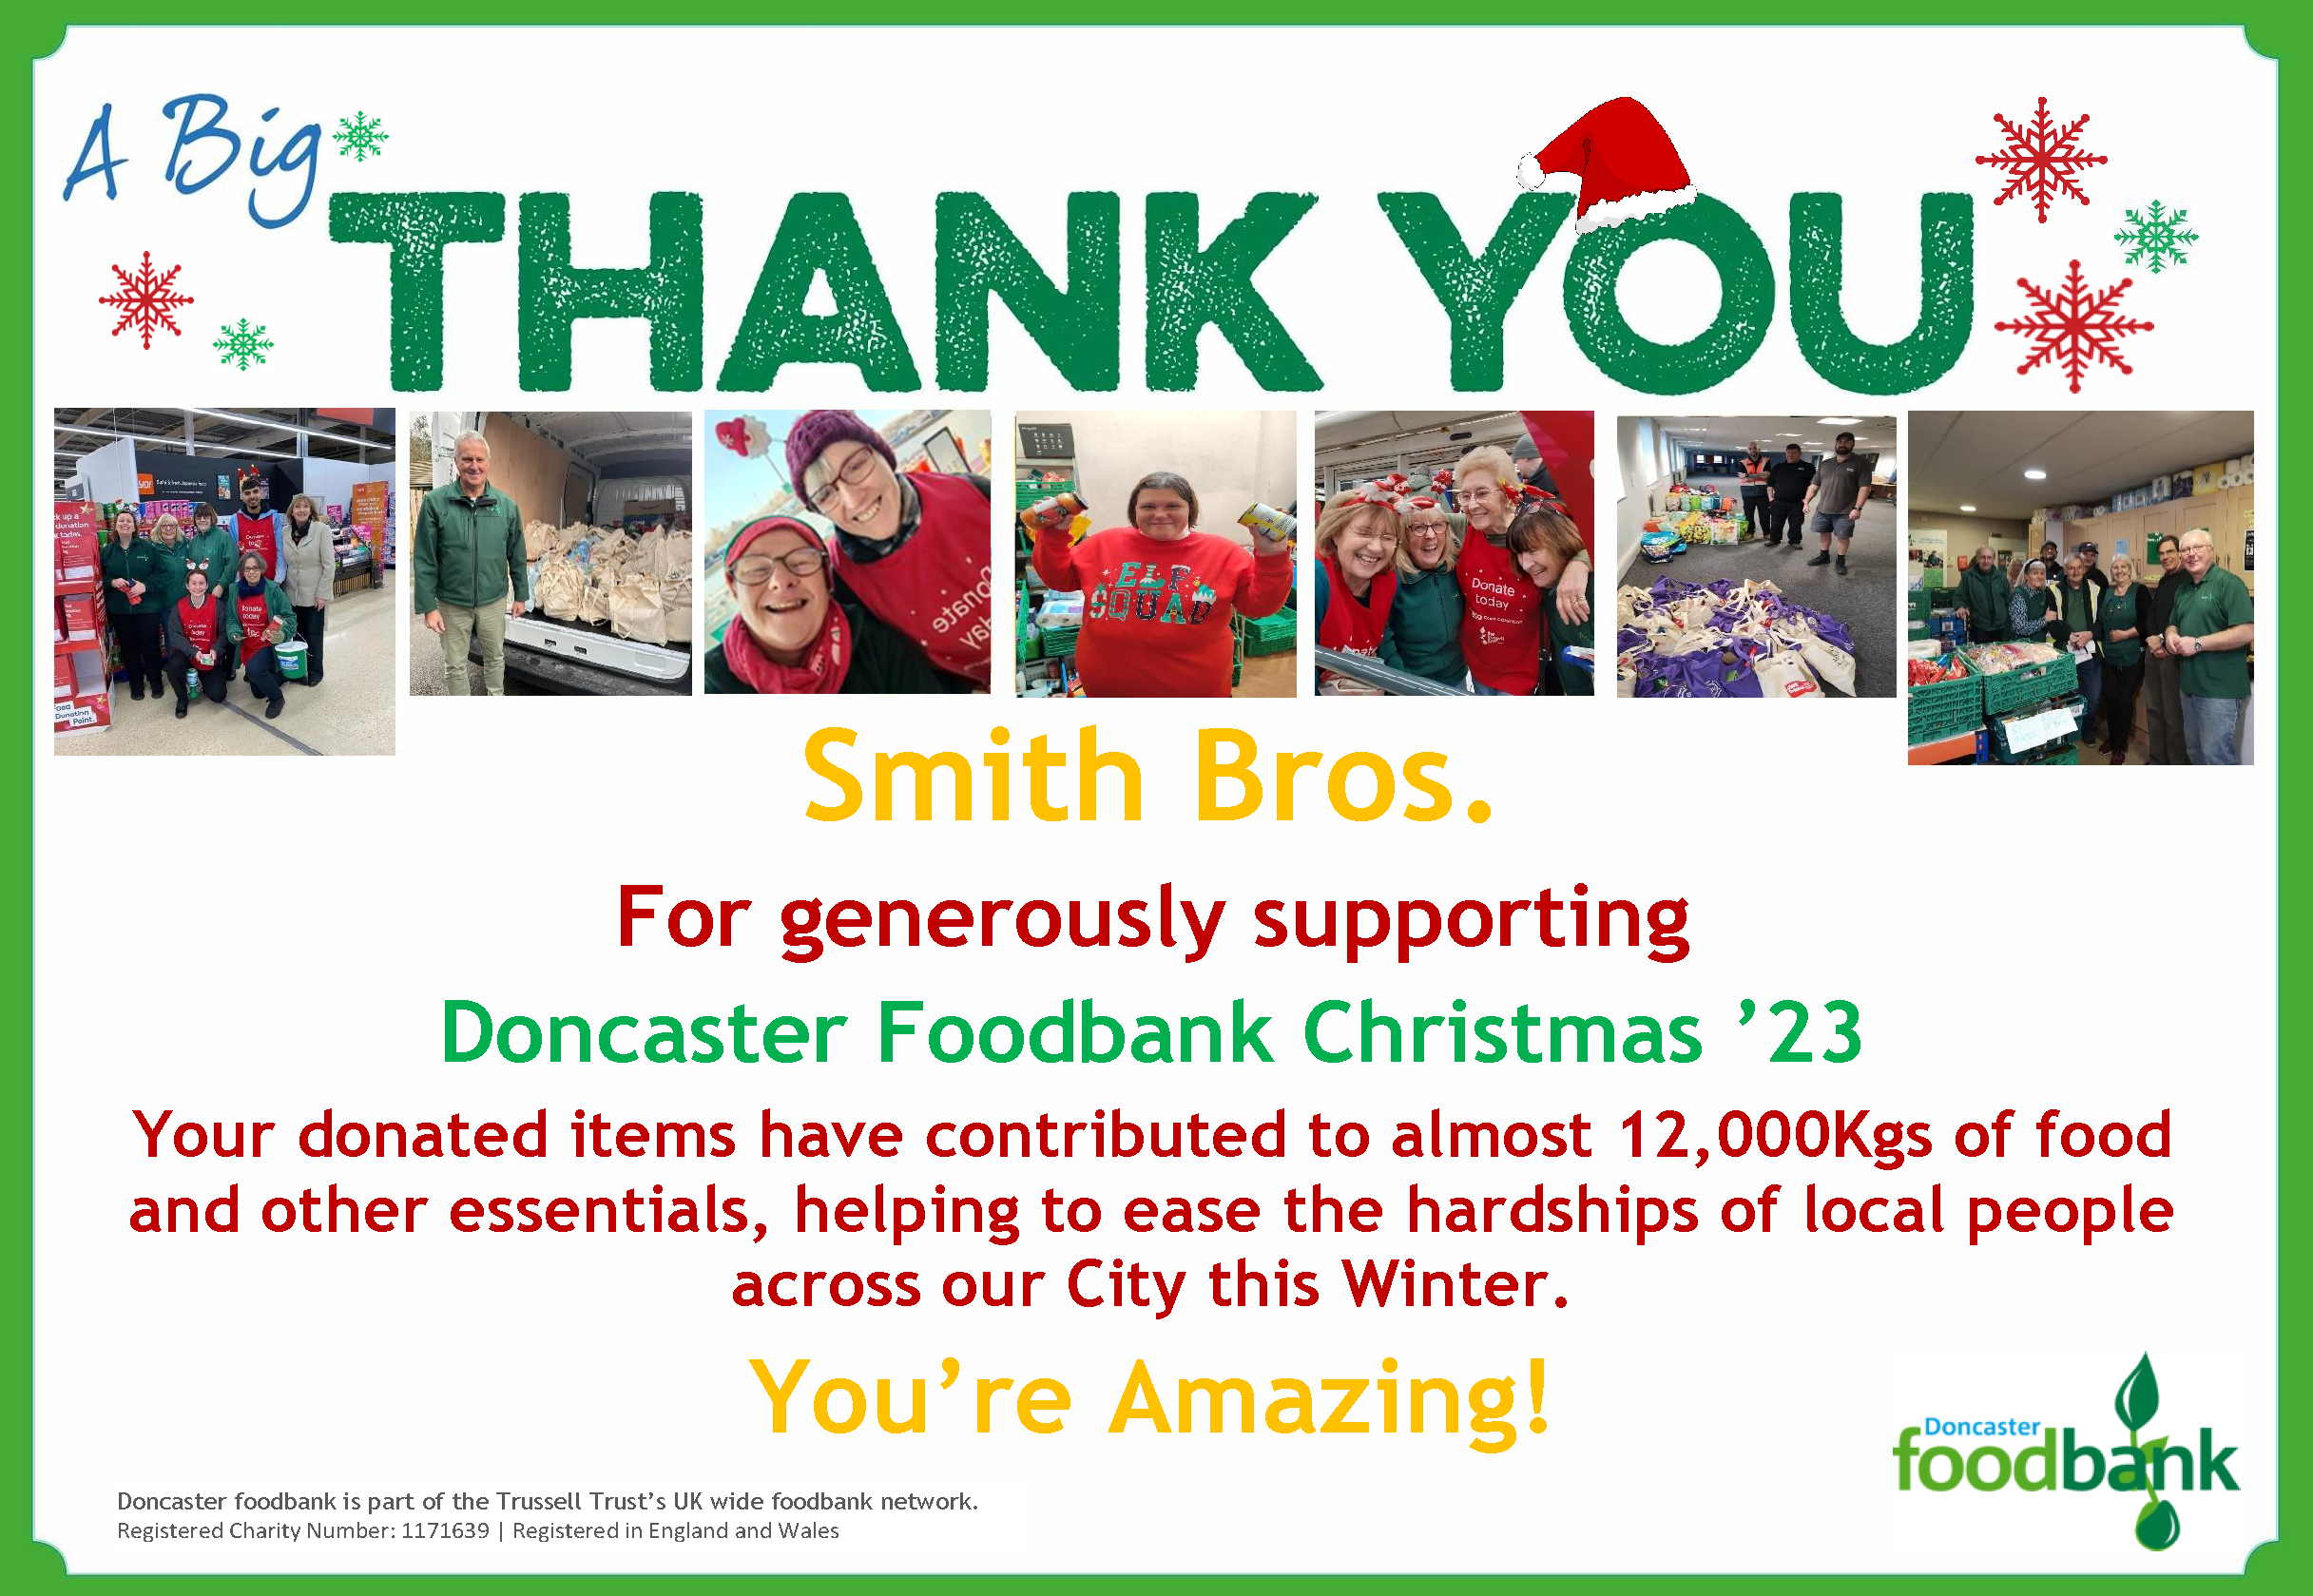 Doncaster Foodbank Charity Work Over Christmas